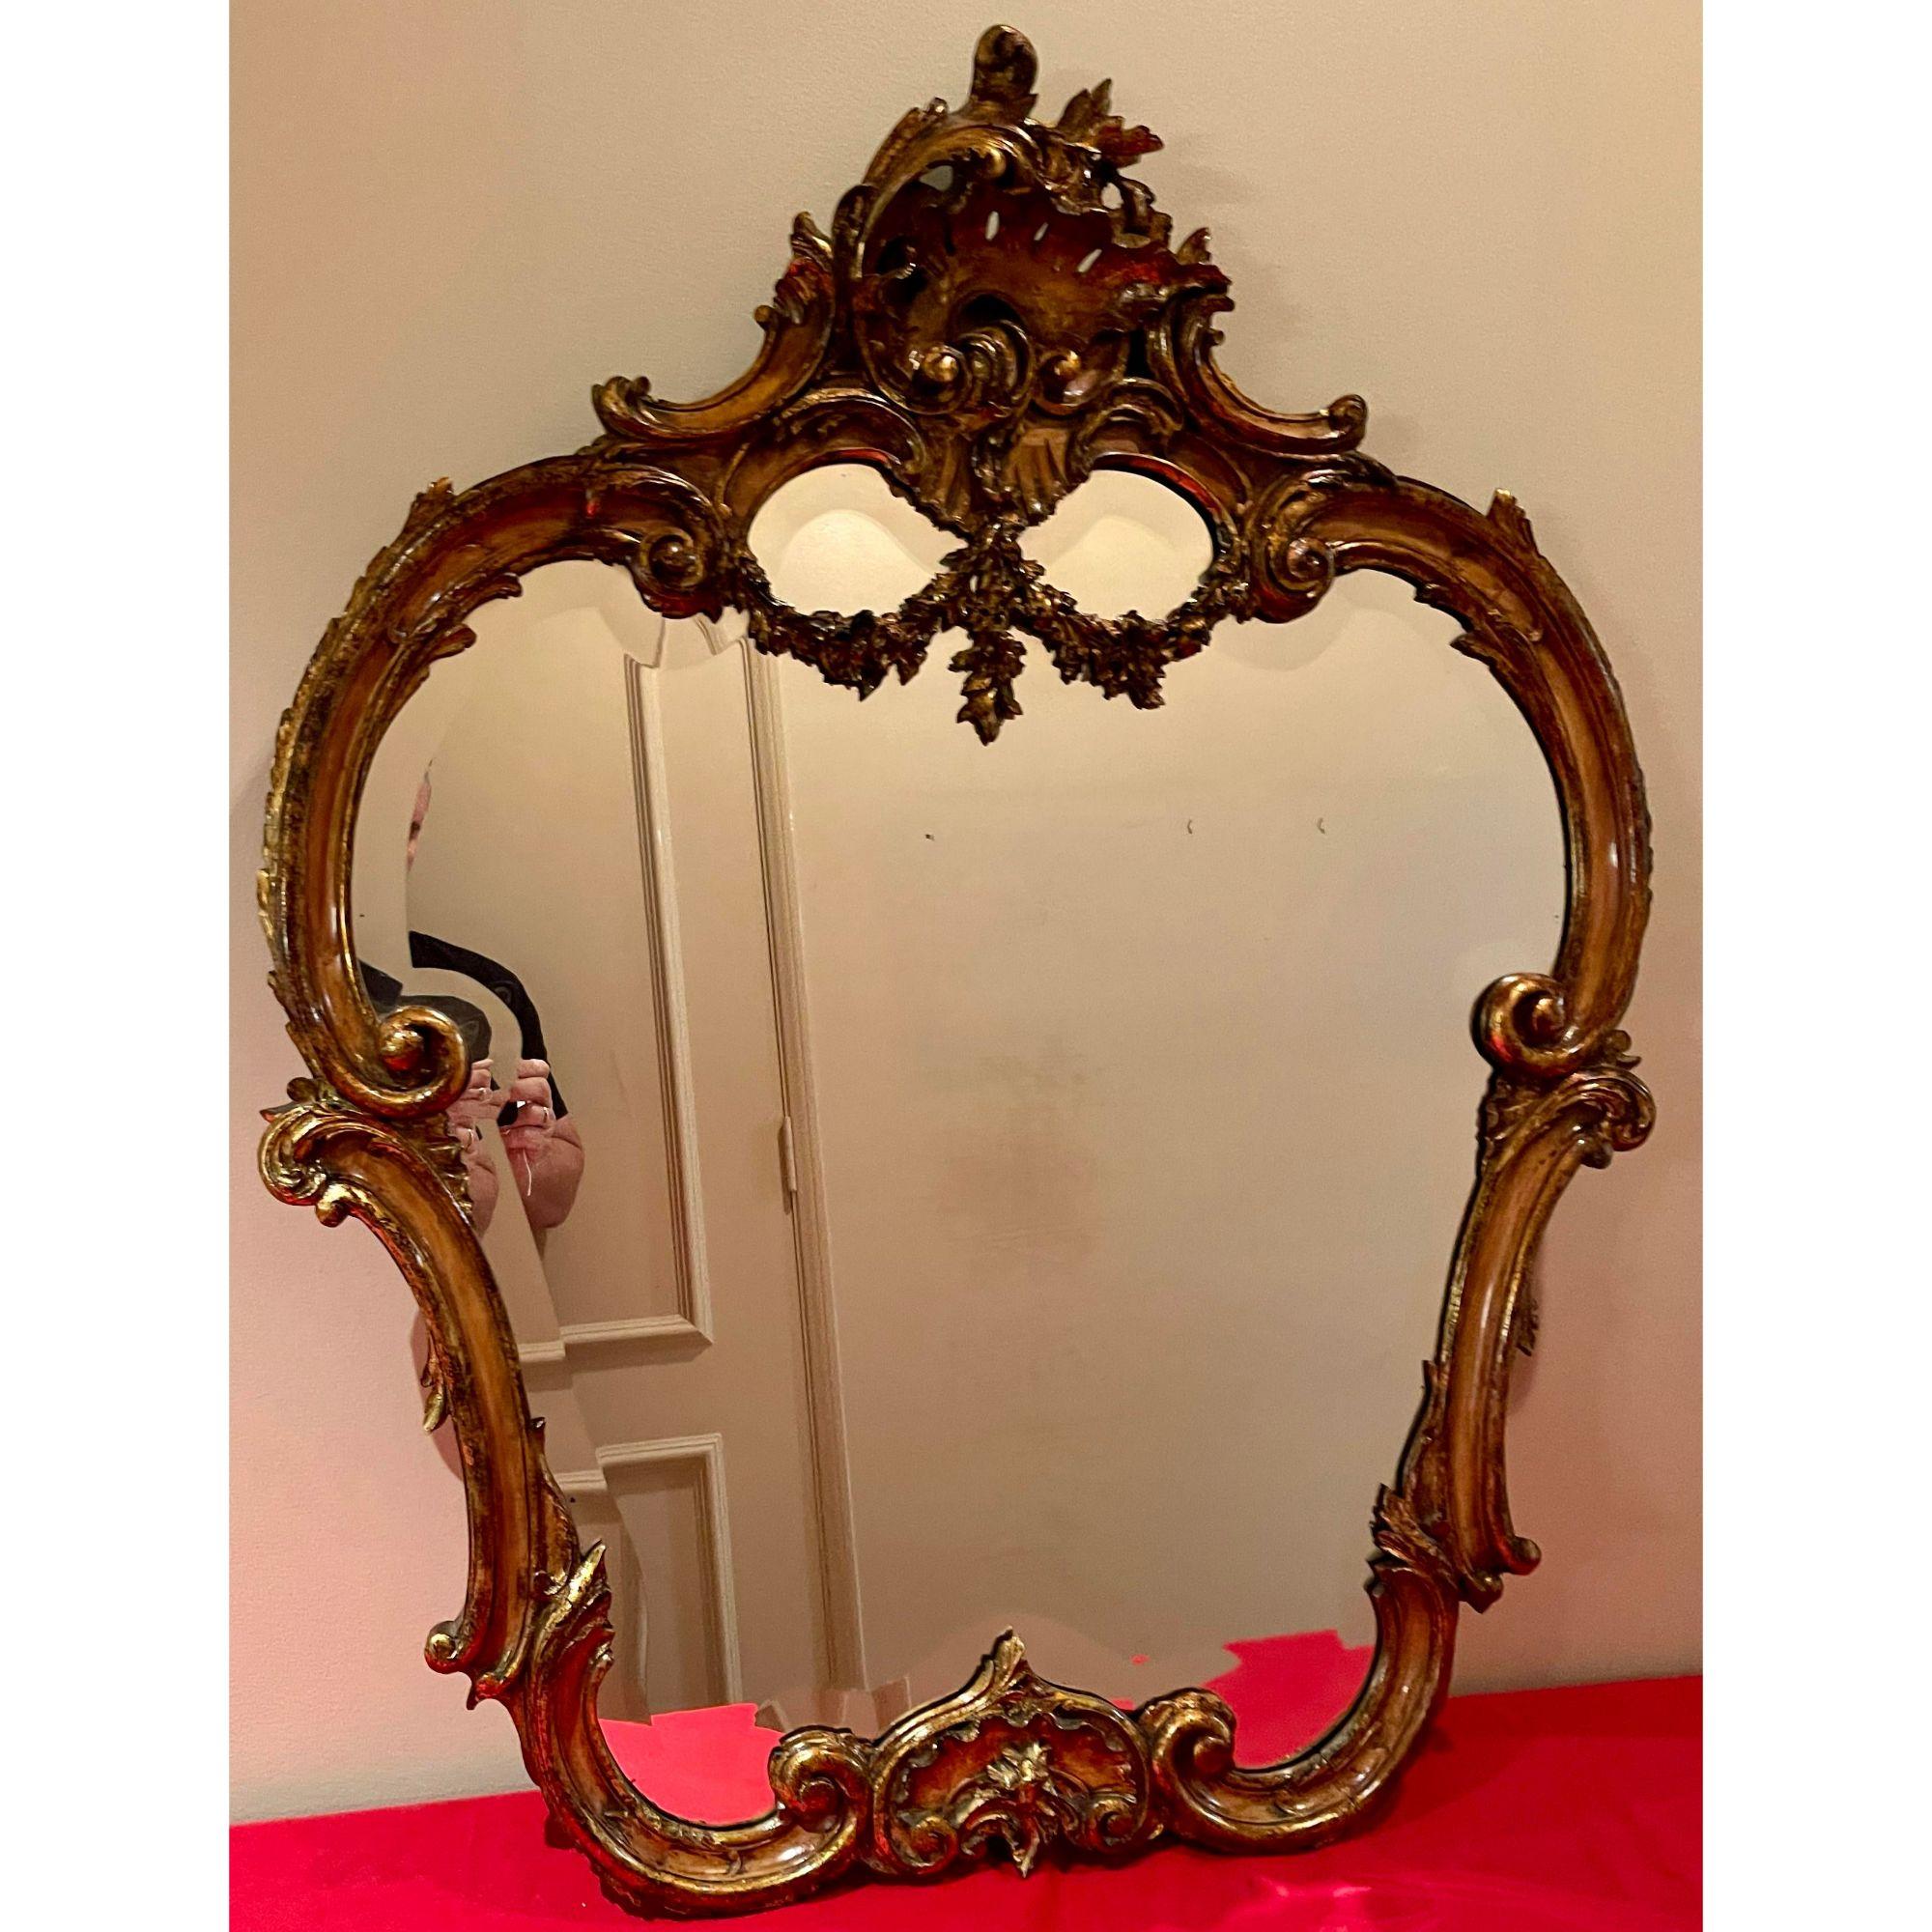 Antique French Louis XV style carved walnut mirror. It is an exquisite example and features gilt highlights in a walnut frame. French maker's mark on the back, Bardie in Paris.

Additional information: 
Materials: Mirror, Walnut
Color: